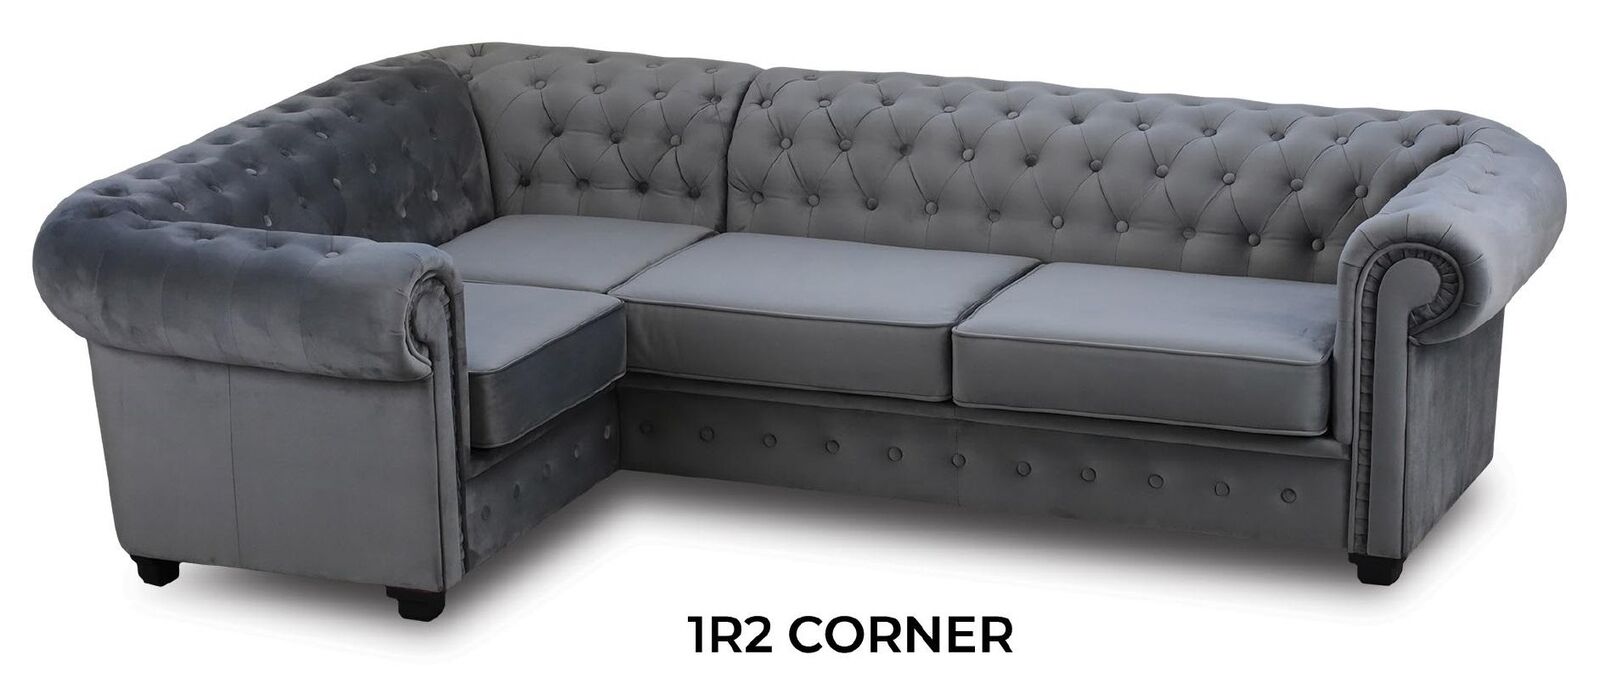 Chesterfield sofa couch upholstery furniture corner set sofas couches fabric textile